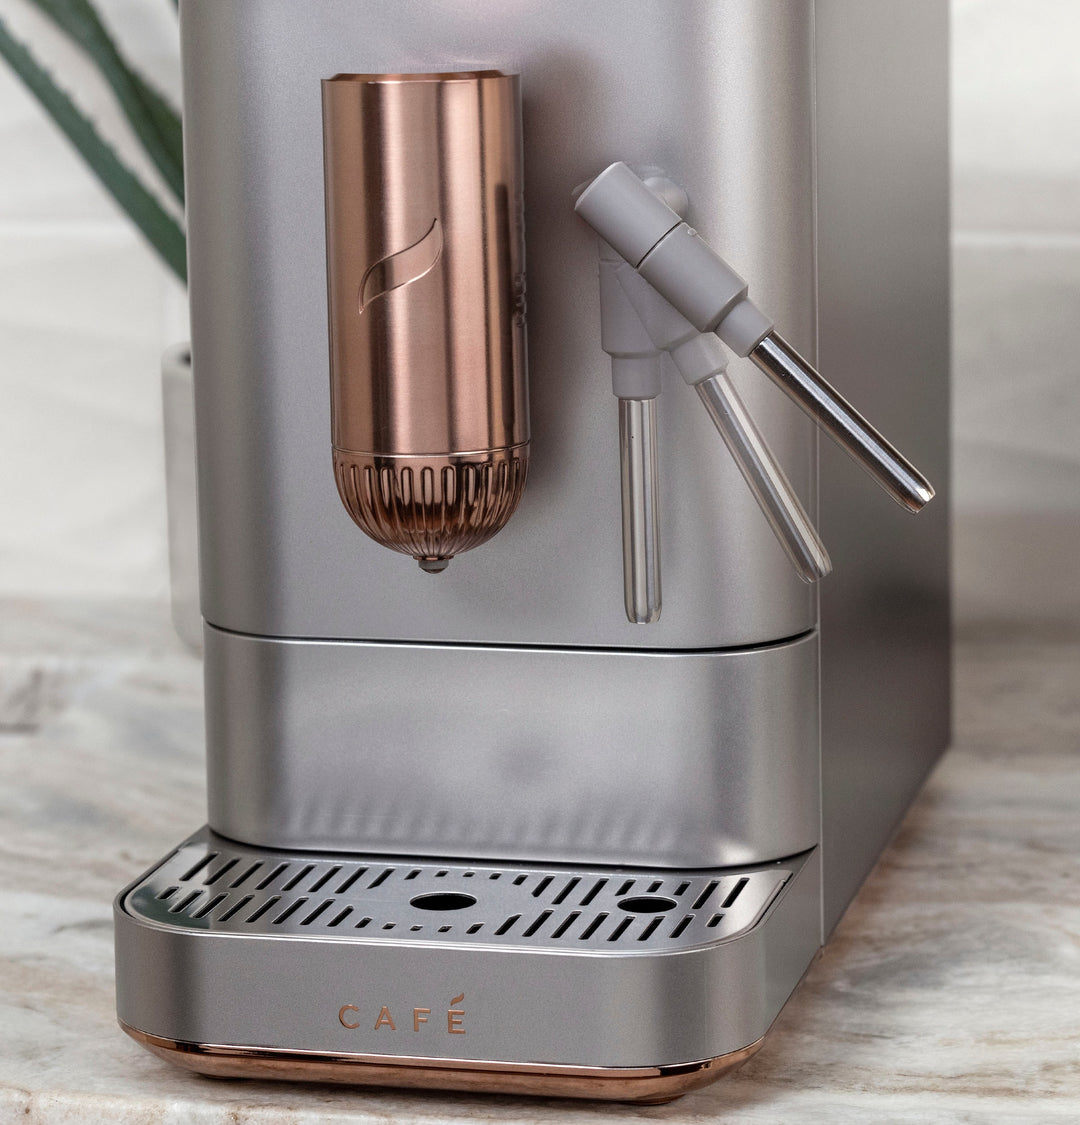 Café - Affetto Automatic Espresso Machine with 20 bars of pressure, Milk Frother, and Built-In Wi-Fi - Steel Silver_15